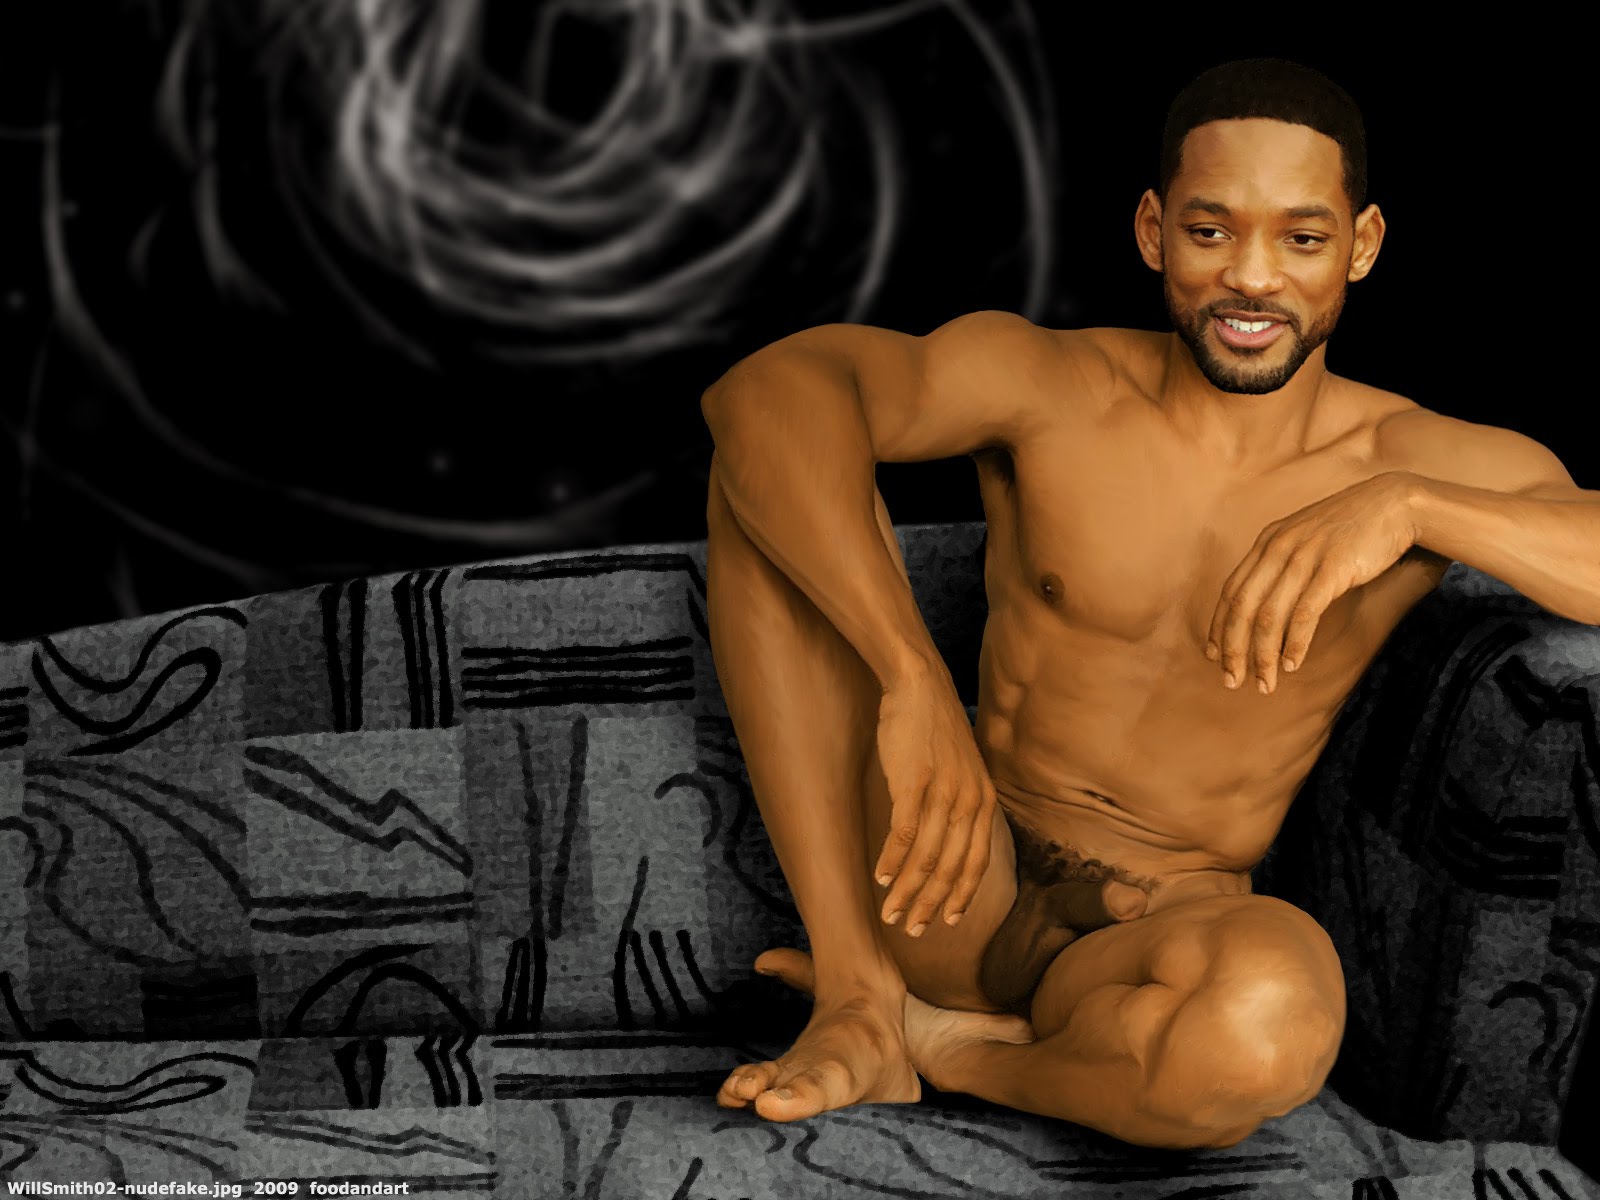 Nude will smith